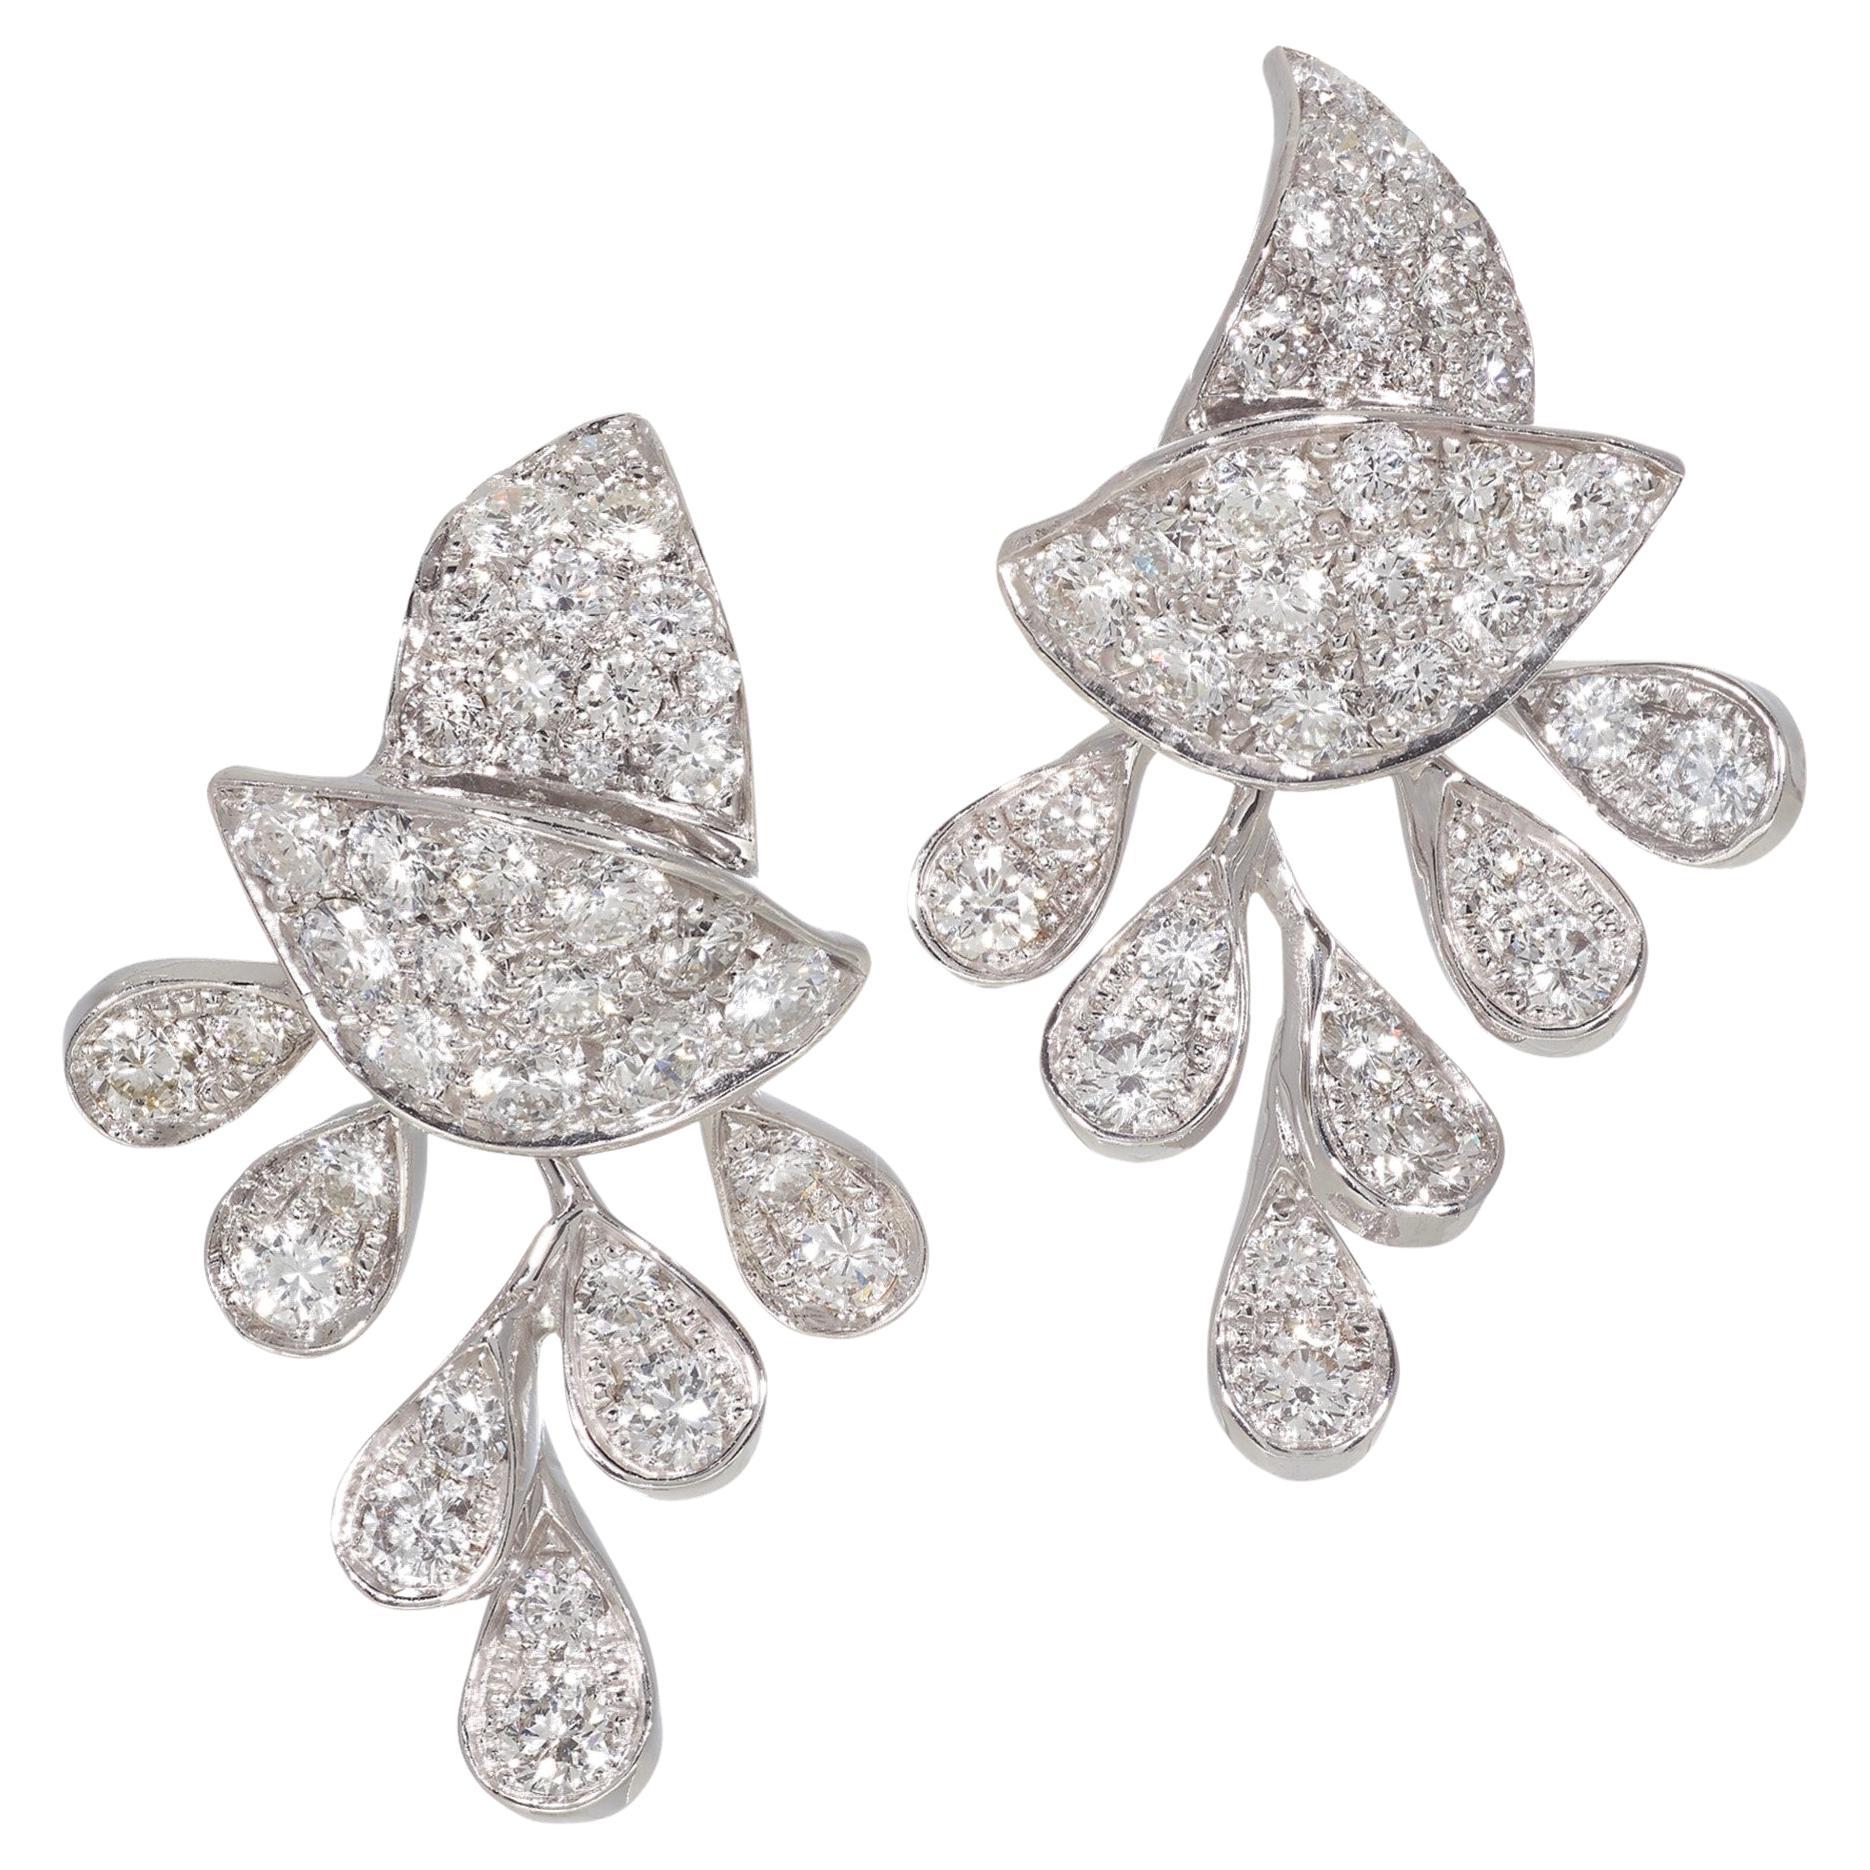 White Gold Drop Earrings set with Diamonds